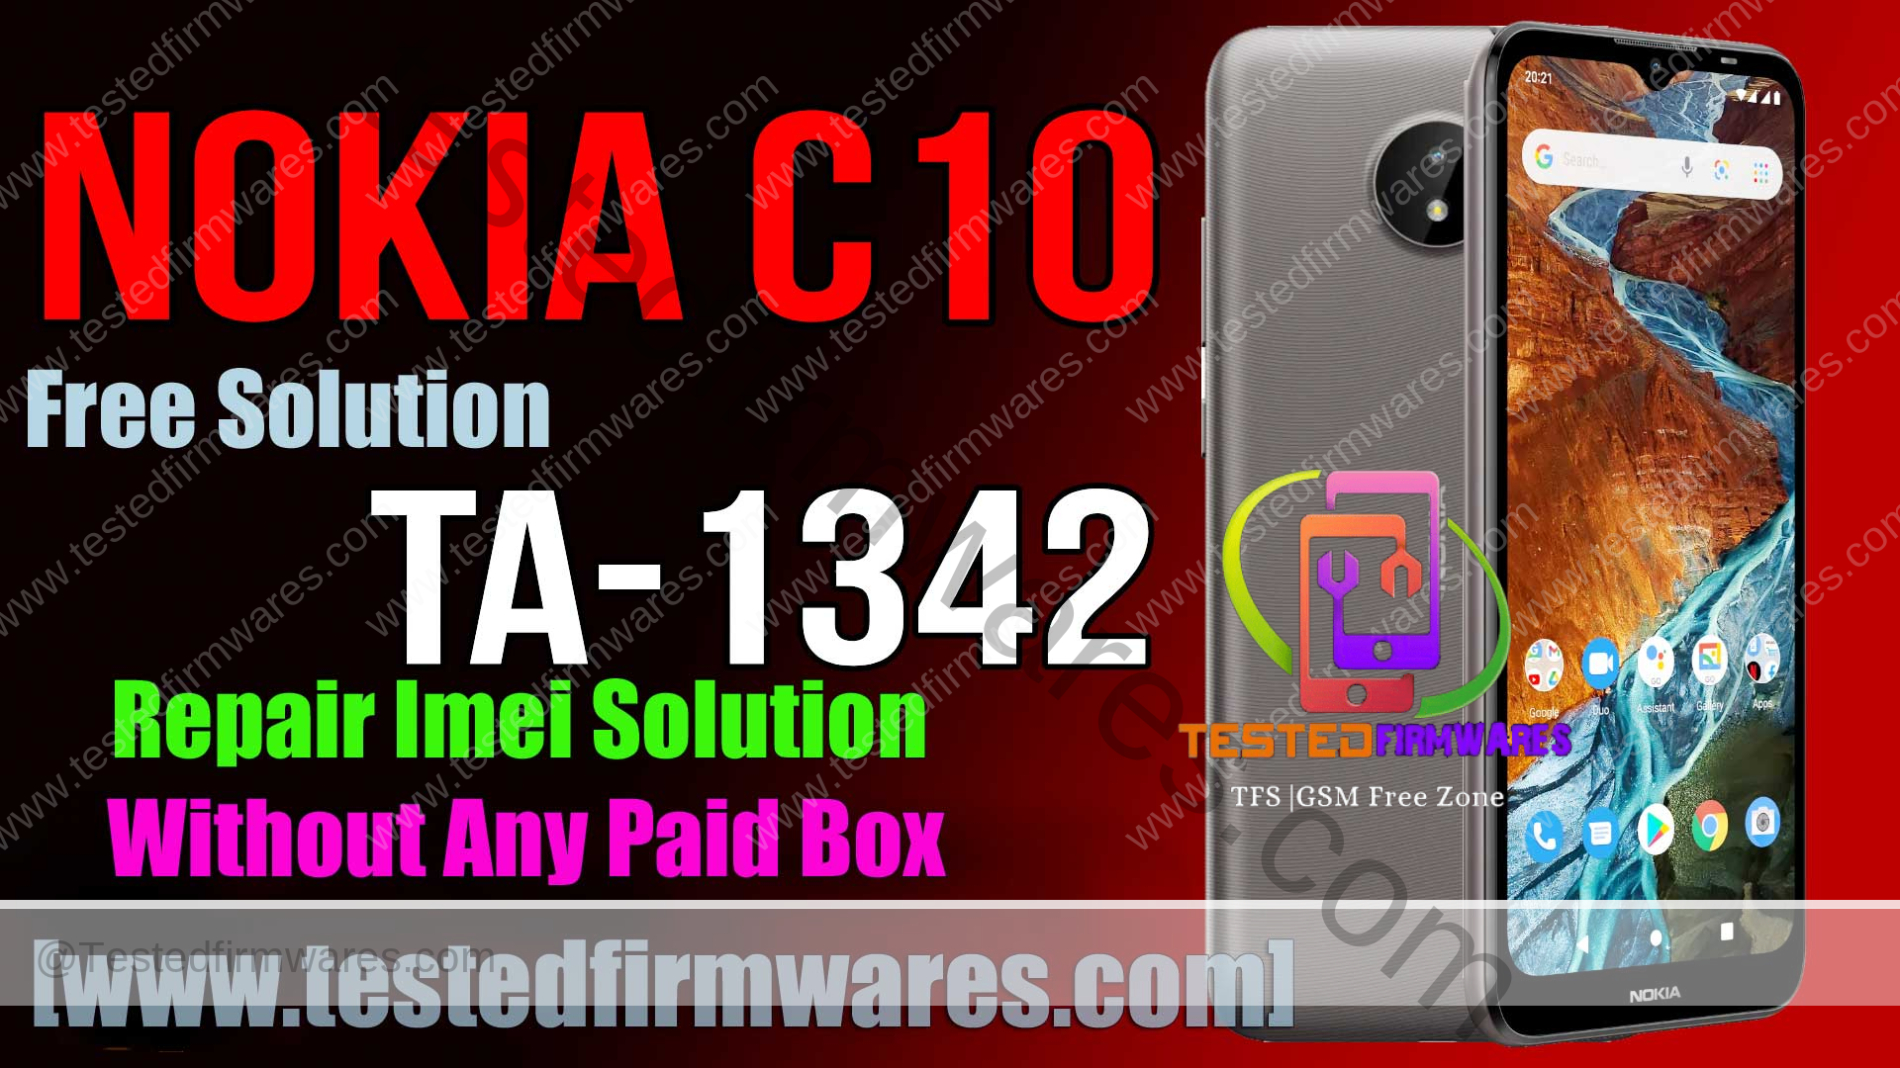 Nokia TA-1342 Repair Imei Solution Without Any Paid Box Free Download[www.testedfirmwares.com]